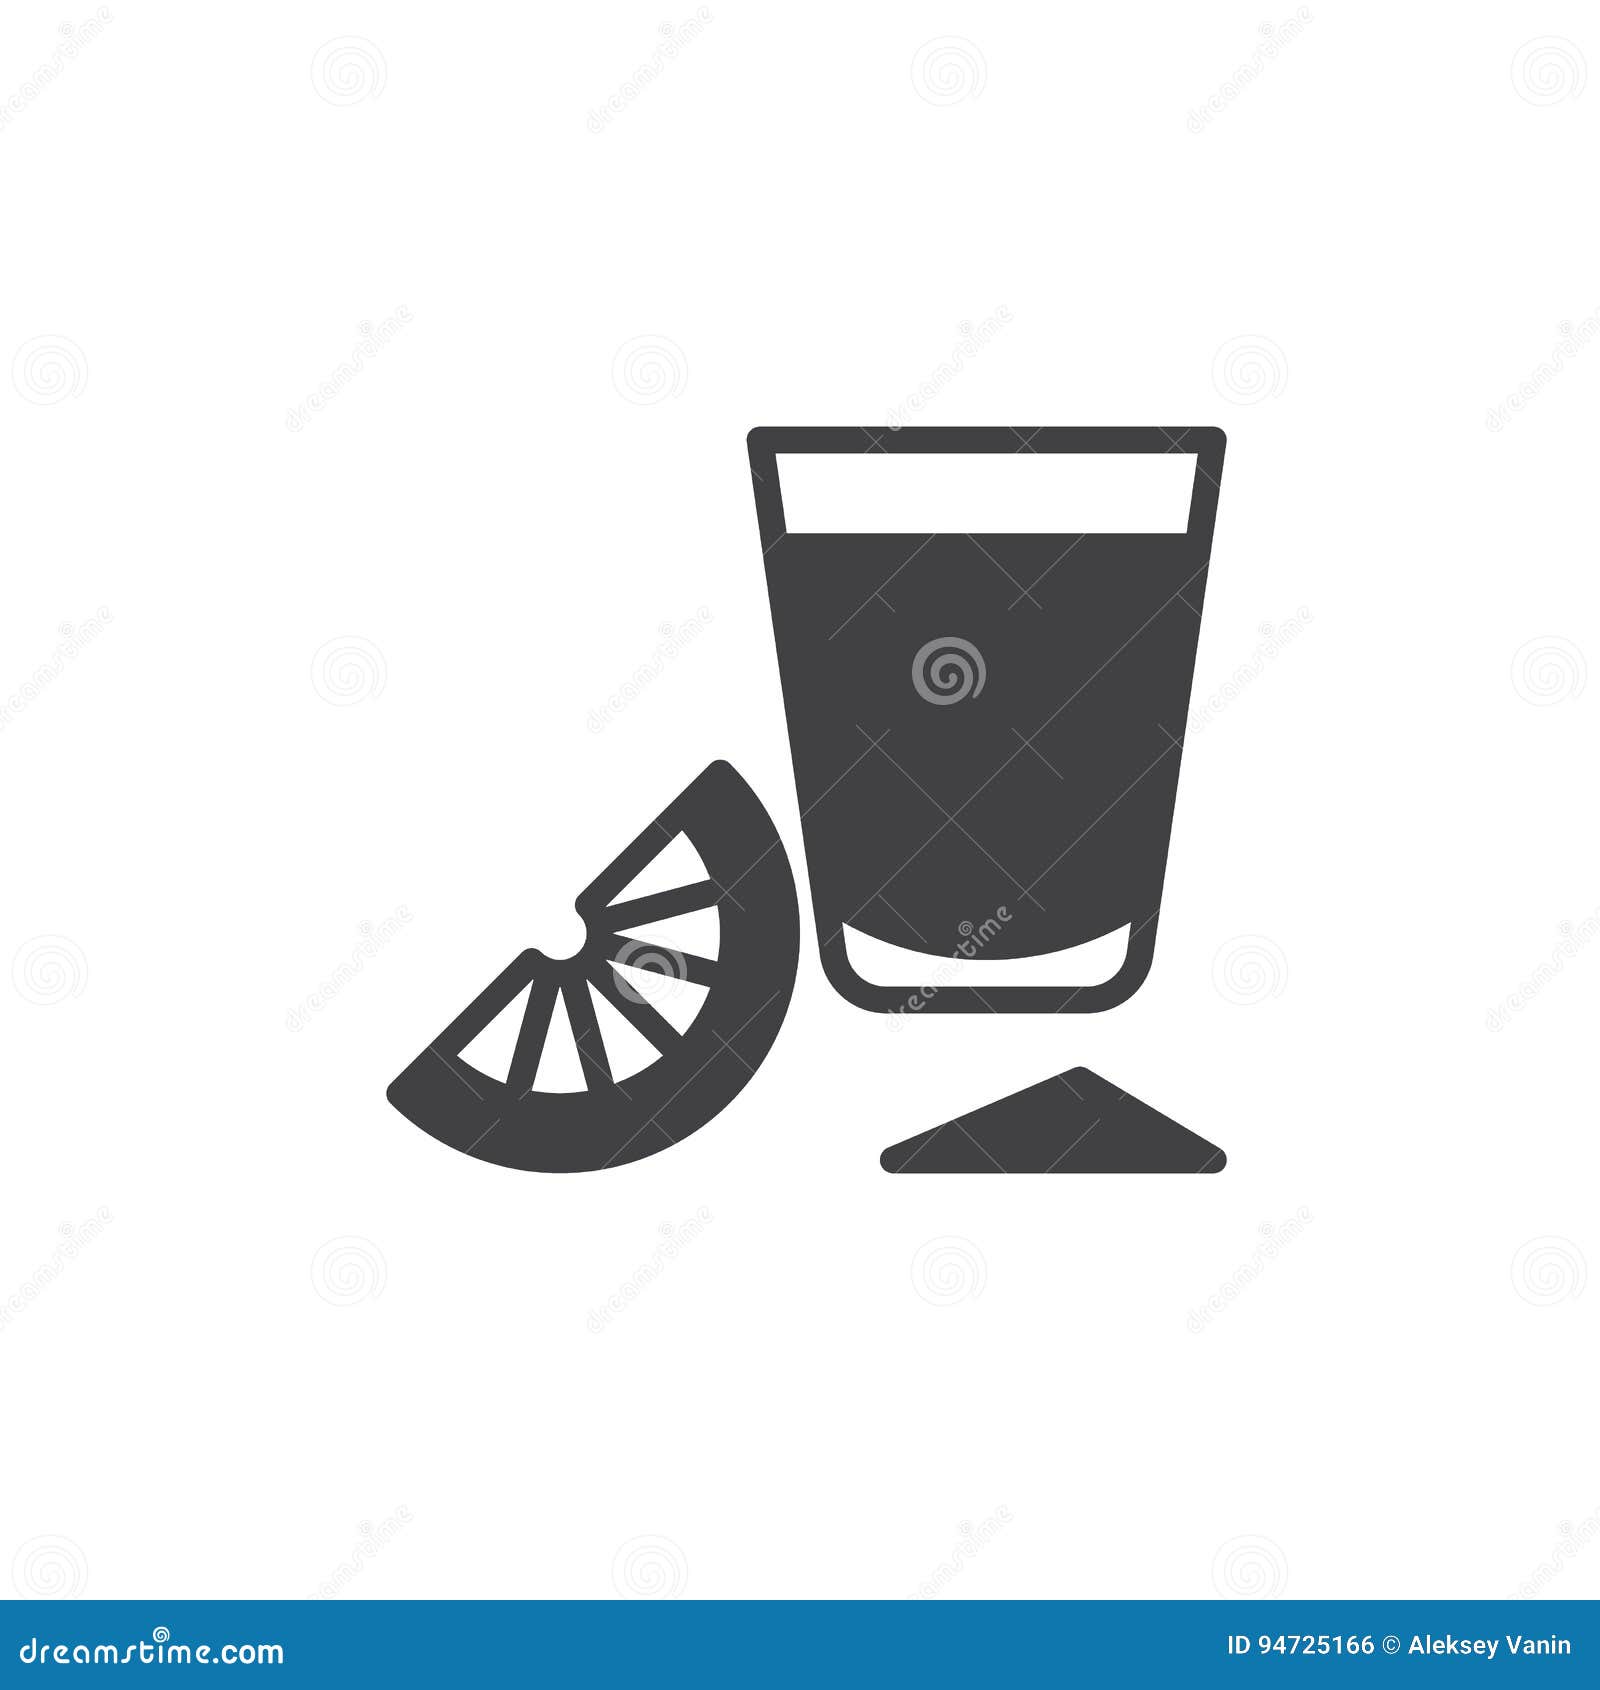 Tequila shot stock illustrations â tequila shot stock illustrations vectors clipart